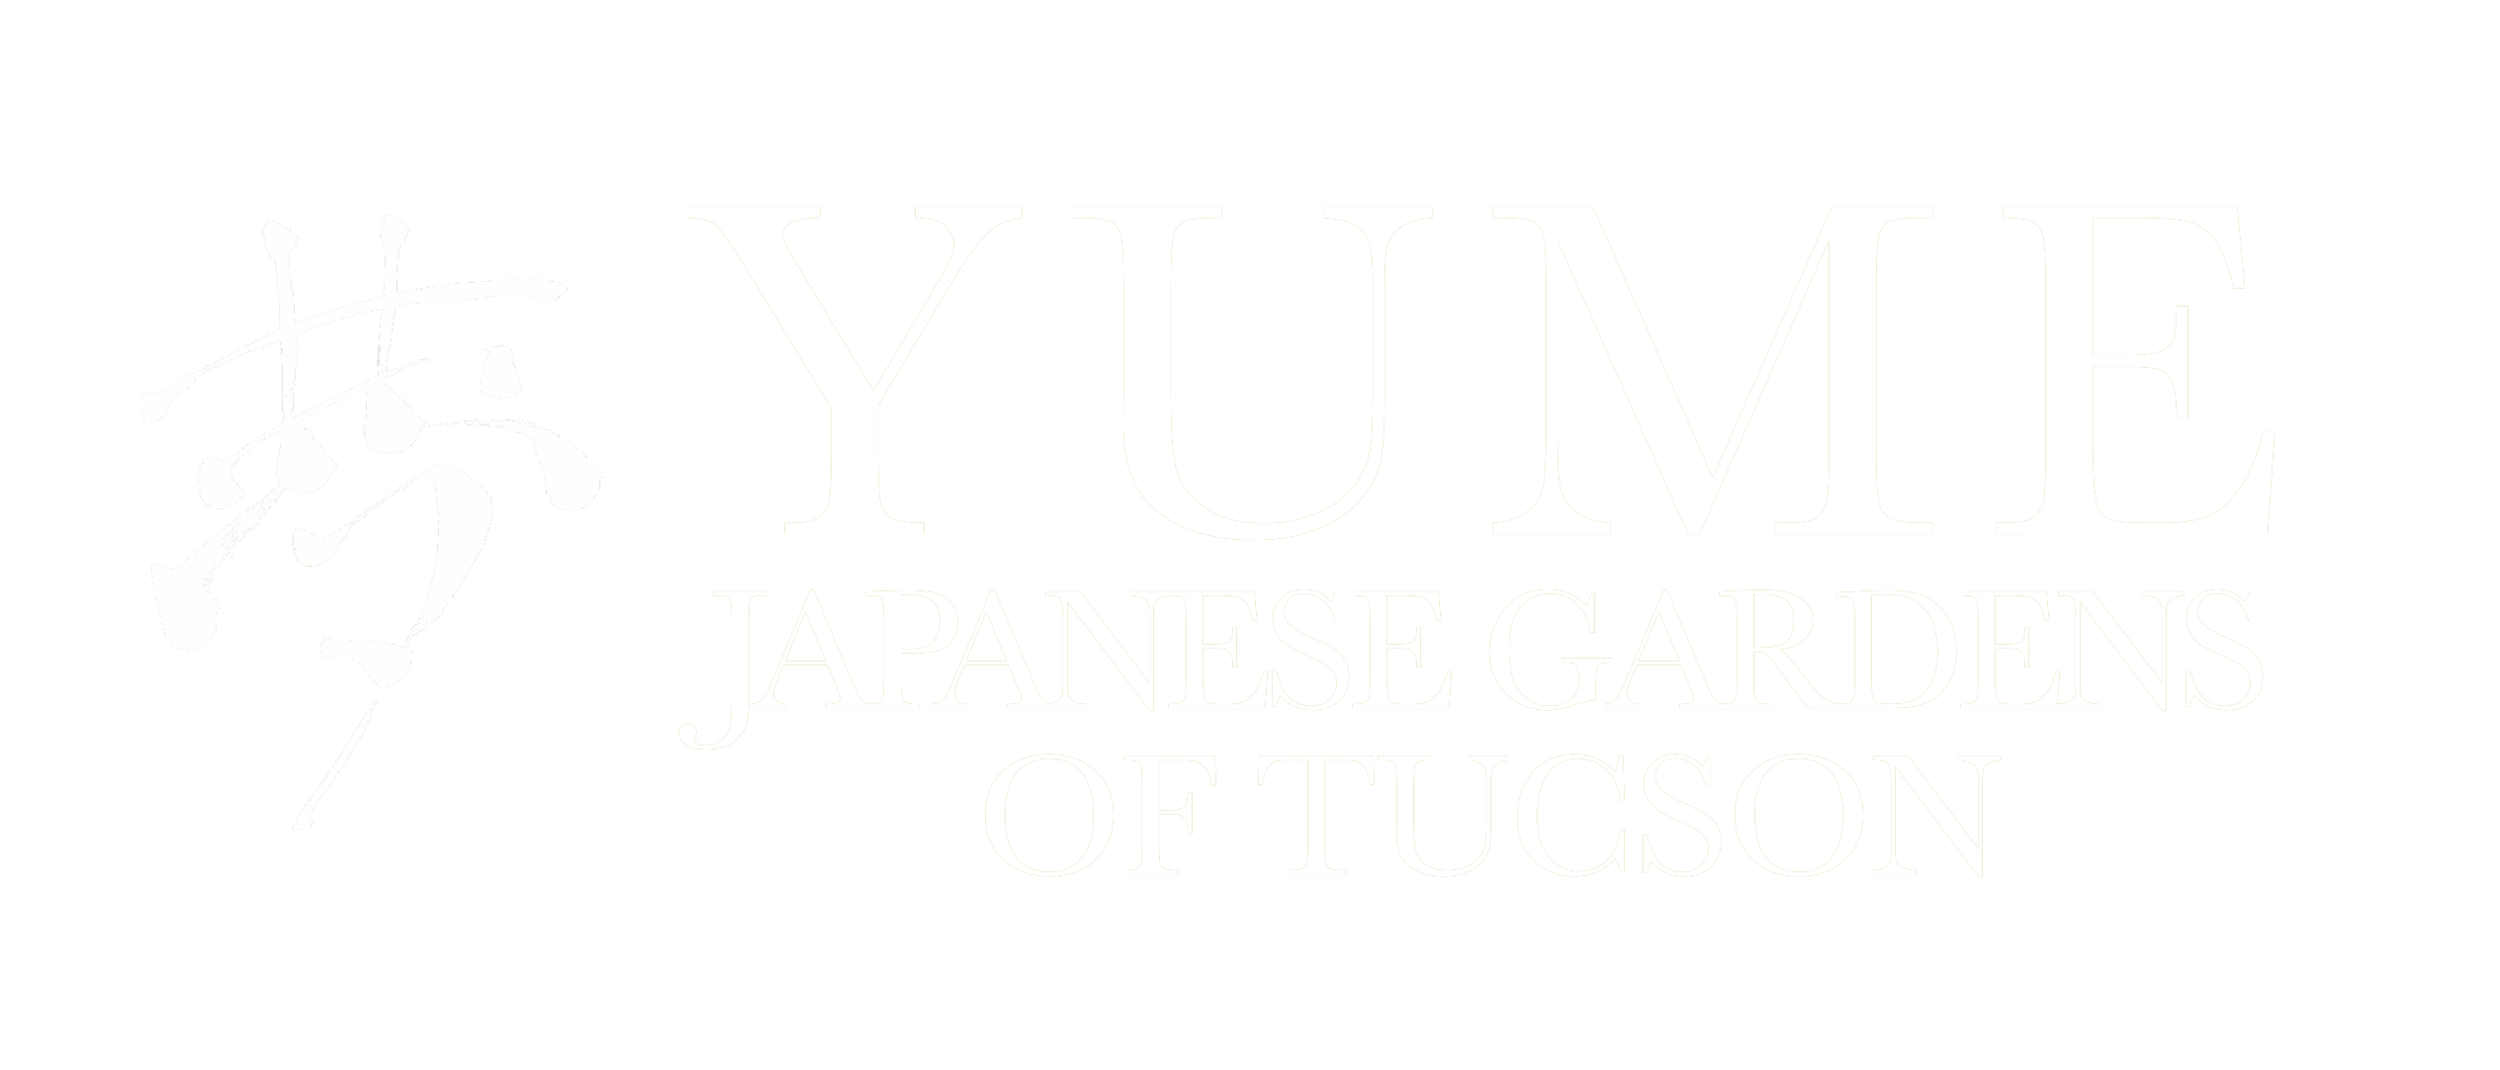 Events — Yume Japanese Gardens of Tucson